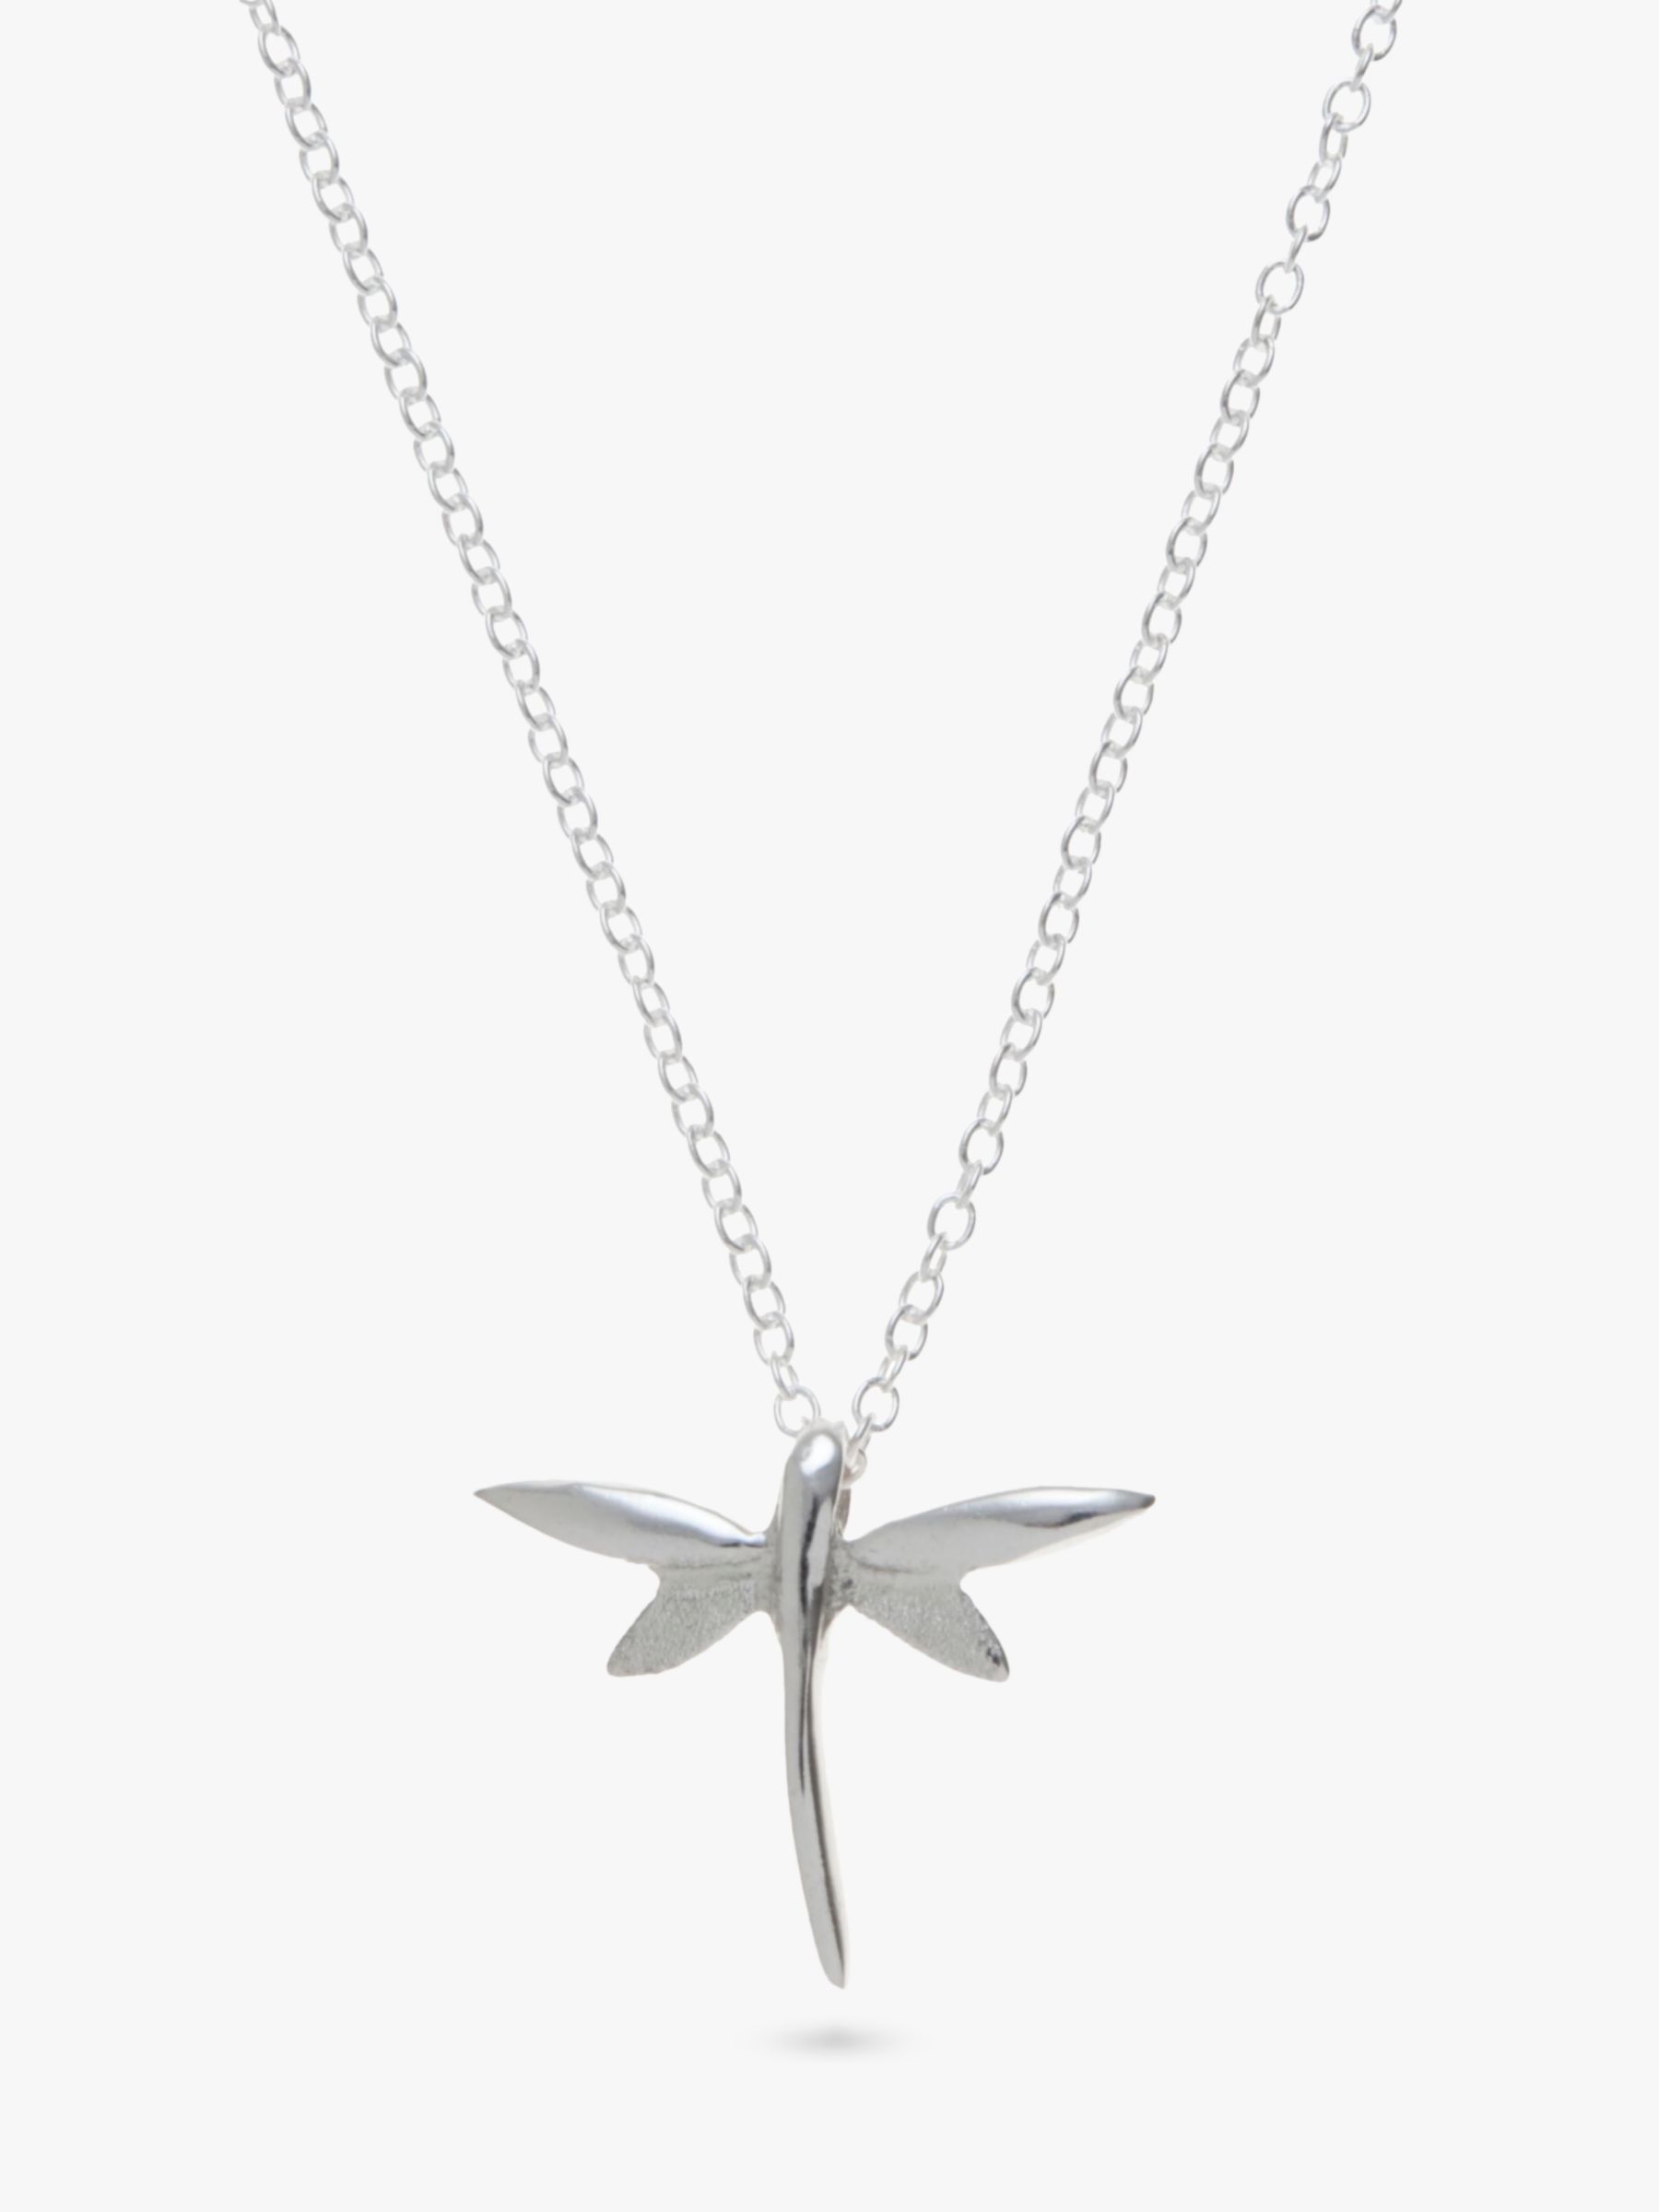 Andea Sterling Silver Dragonfly Pendant Necklace